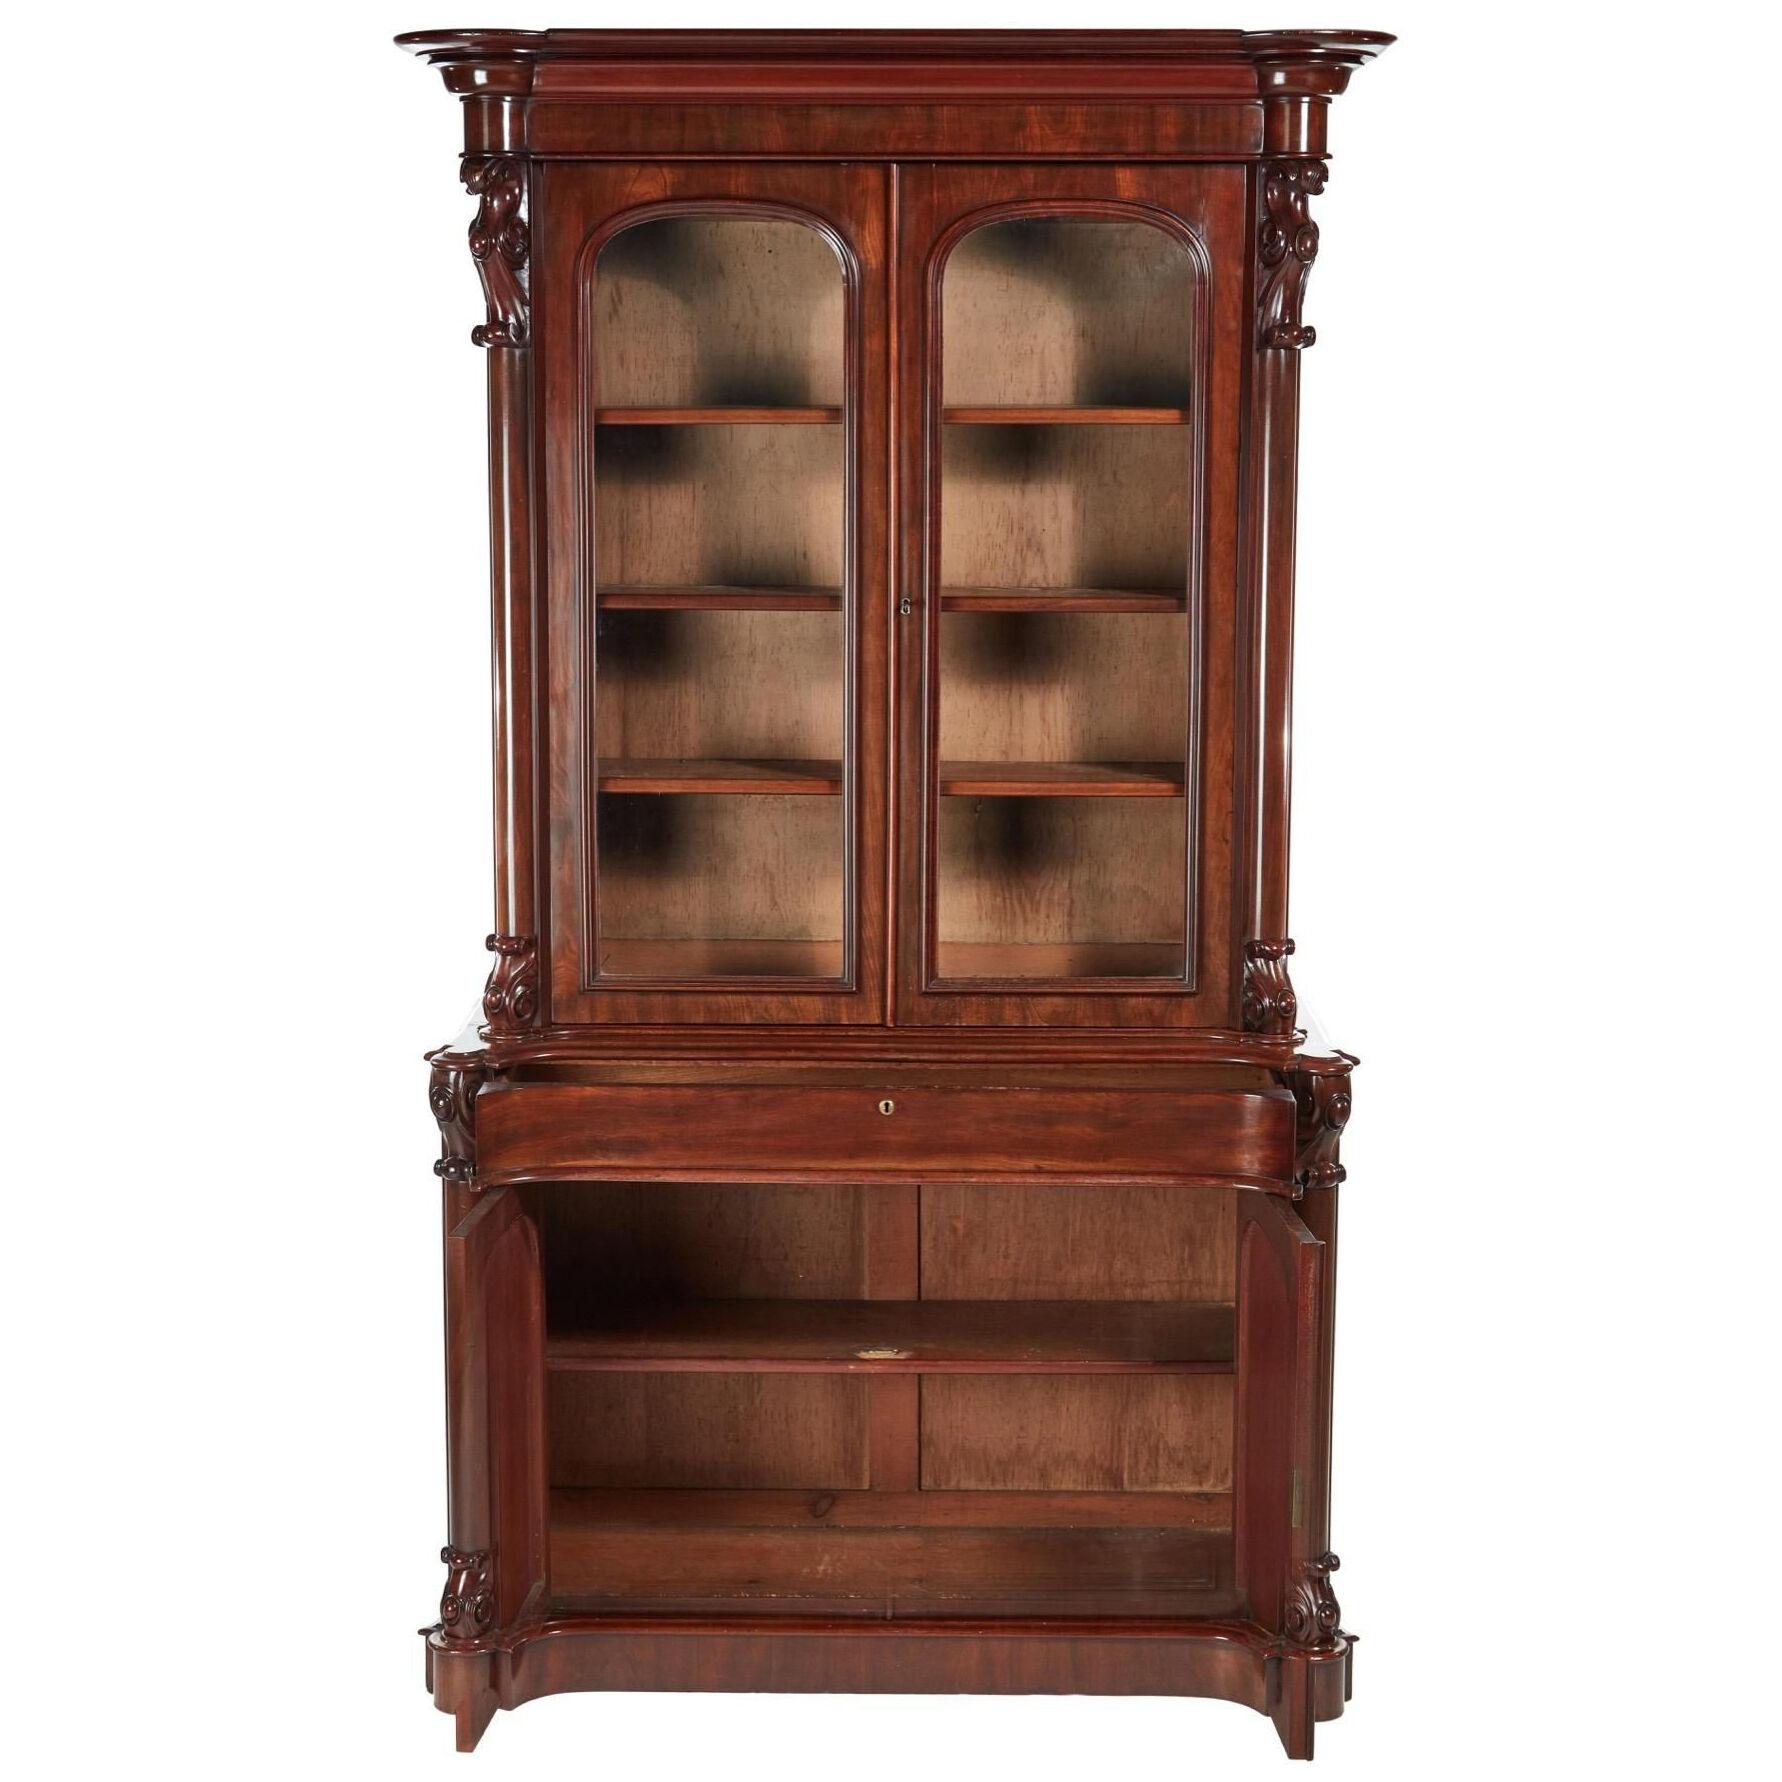 Superior Quality Antique Victorian Carved Mahogany Bookcase